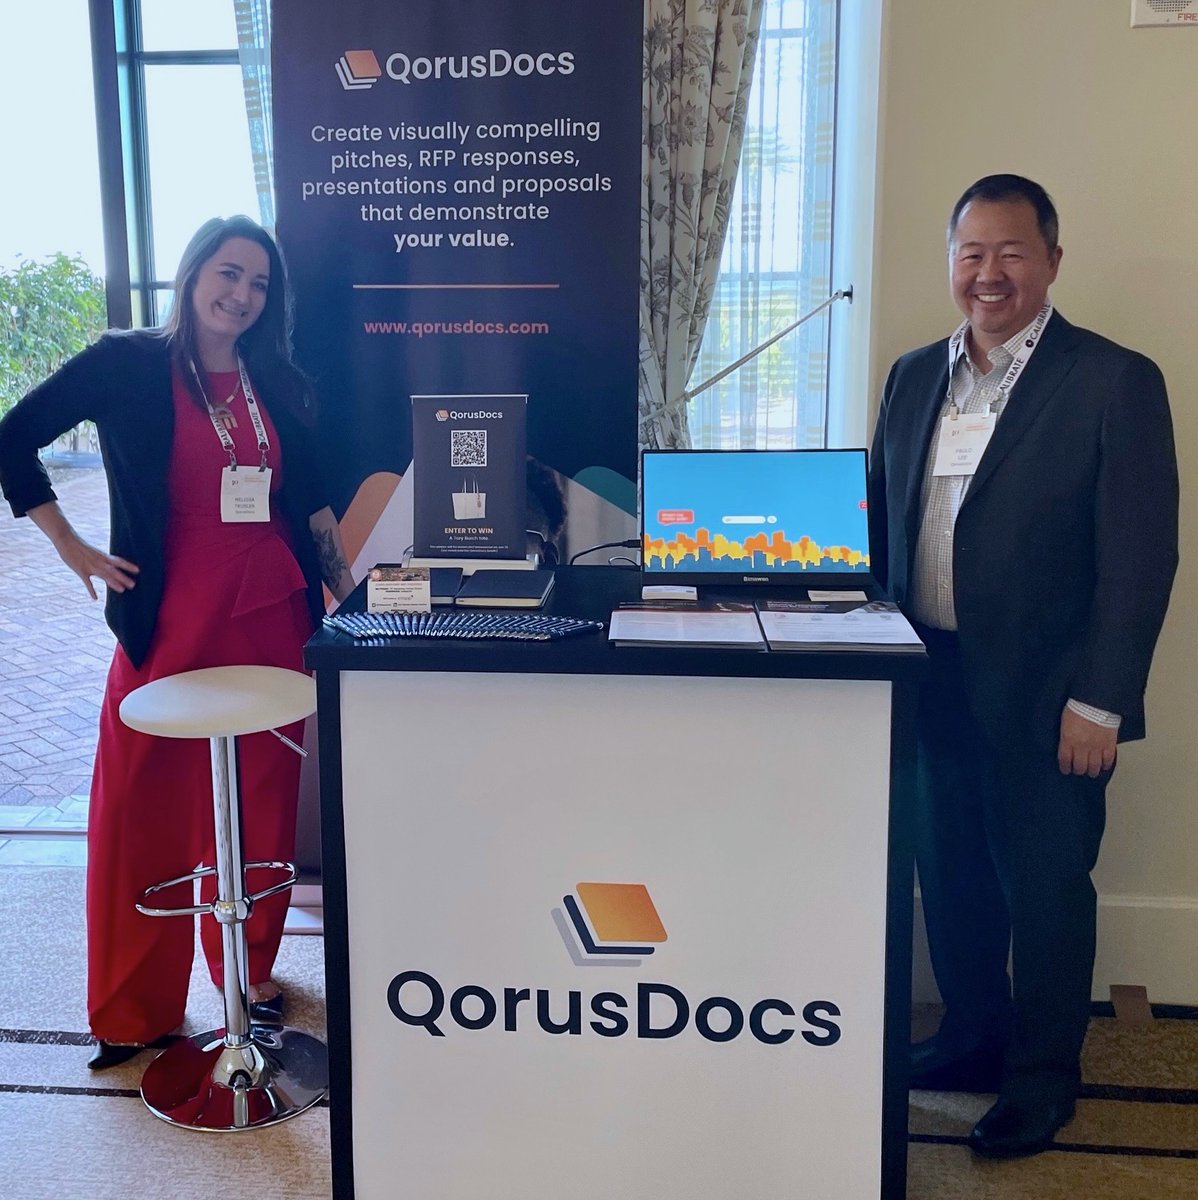 We're at The 30th Annual Marketing Partner Forum in Rancho Palos Verdes, California! Come learn more about us and wish Paulo a happy birthday!

#MPFDiamond #TRInstitute #legalmarketing #lawfirms

qd4.us/3HprKtJ